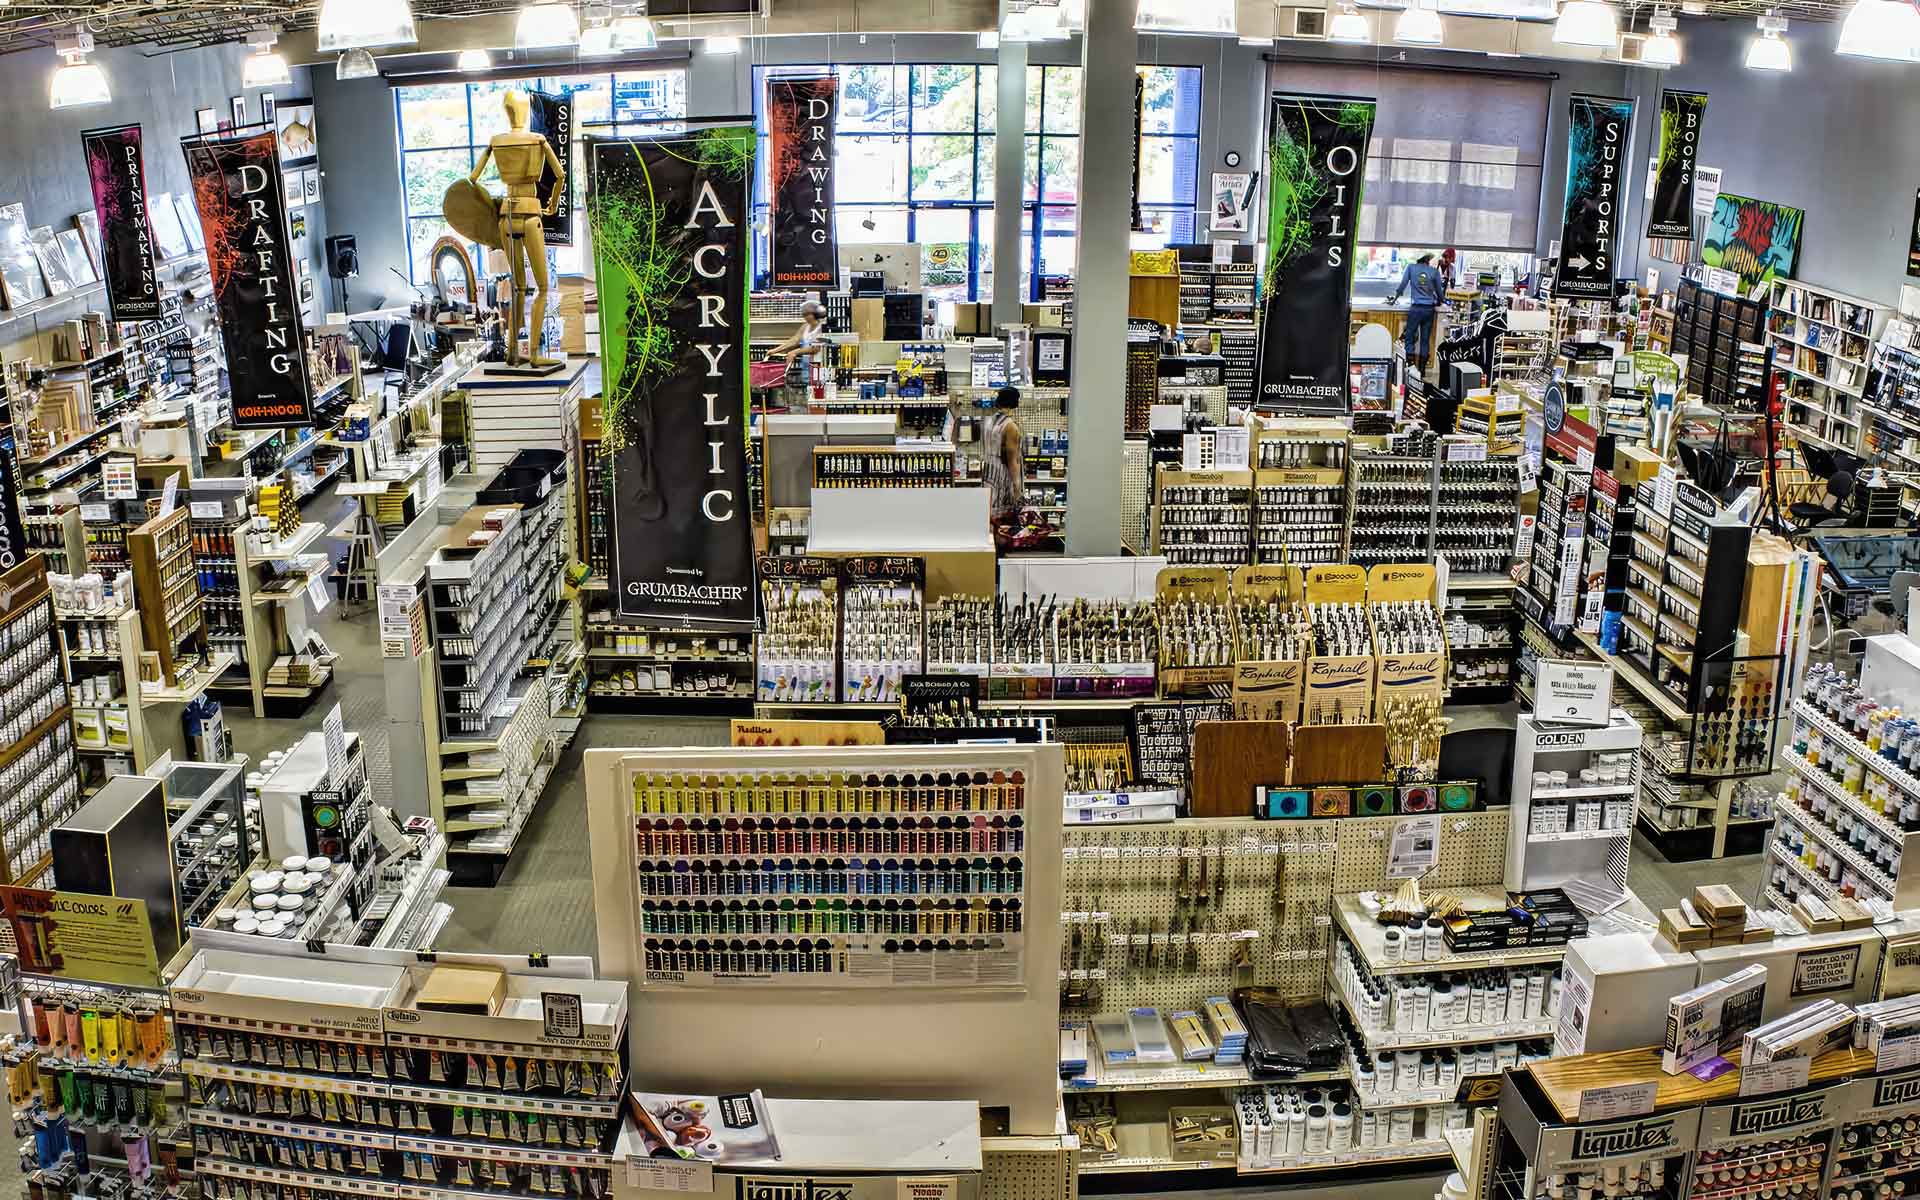 The Art Store/Commercial Art Supply - The Art Store/Commercial Art